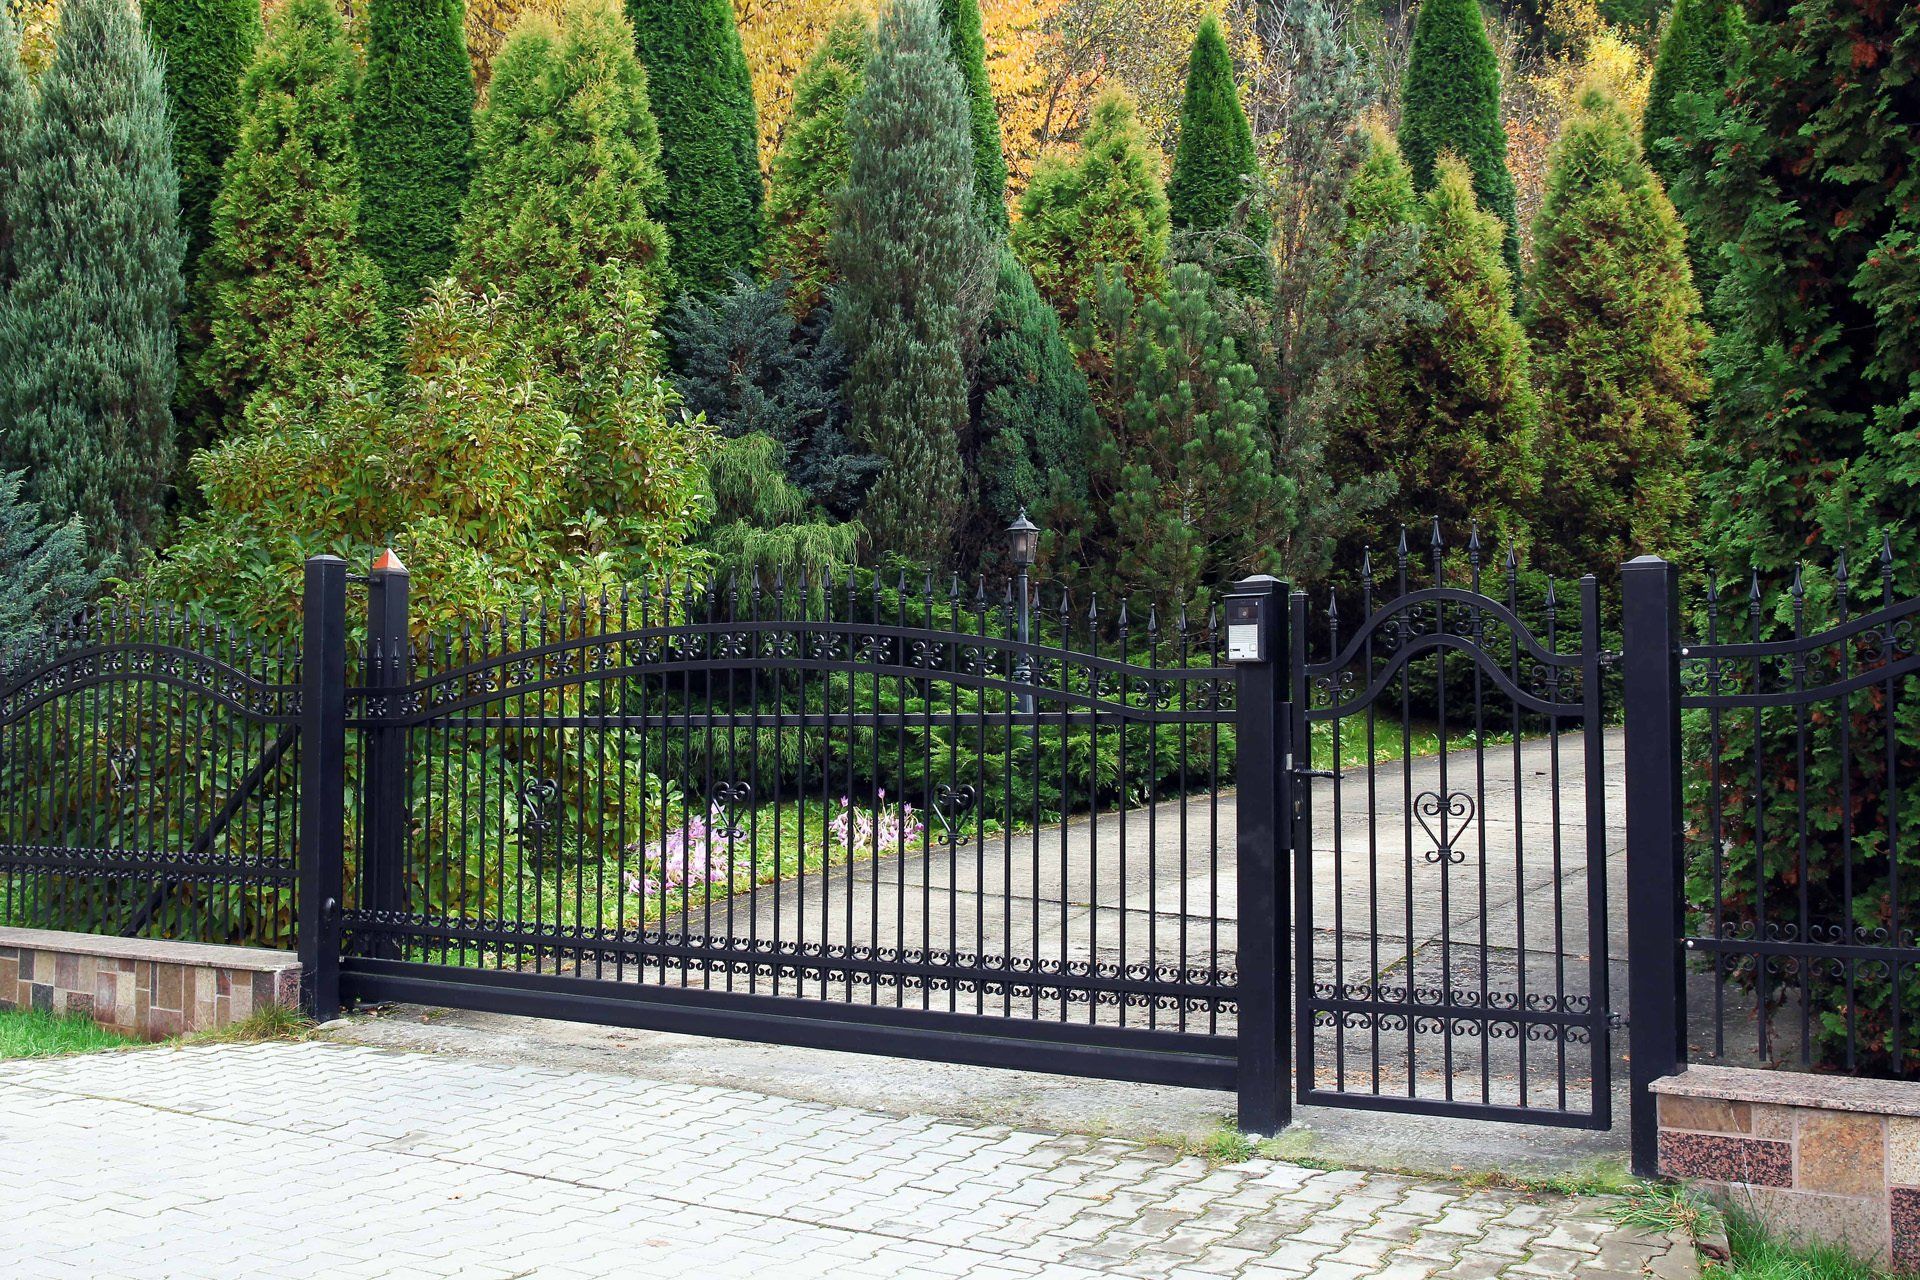 Contact Fence companies St. Petersburg FL